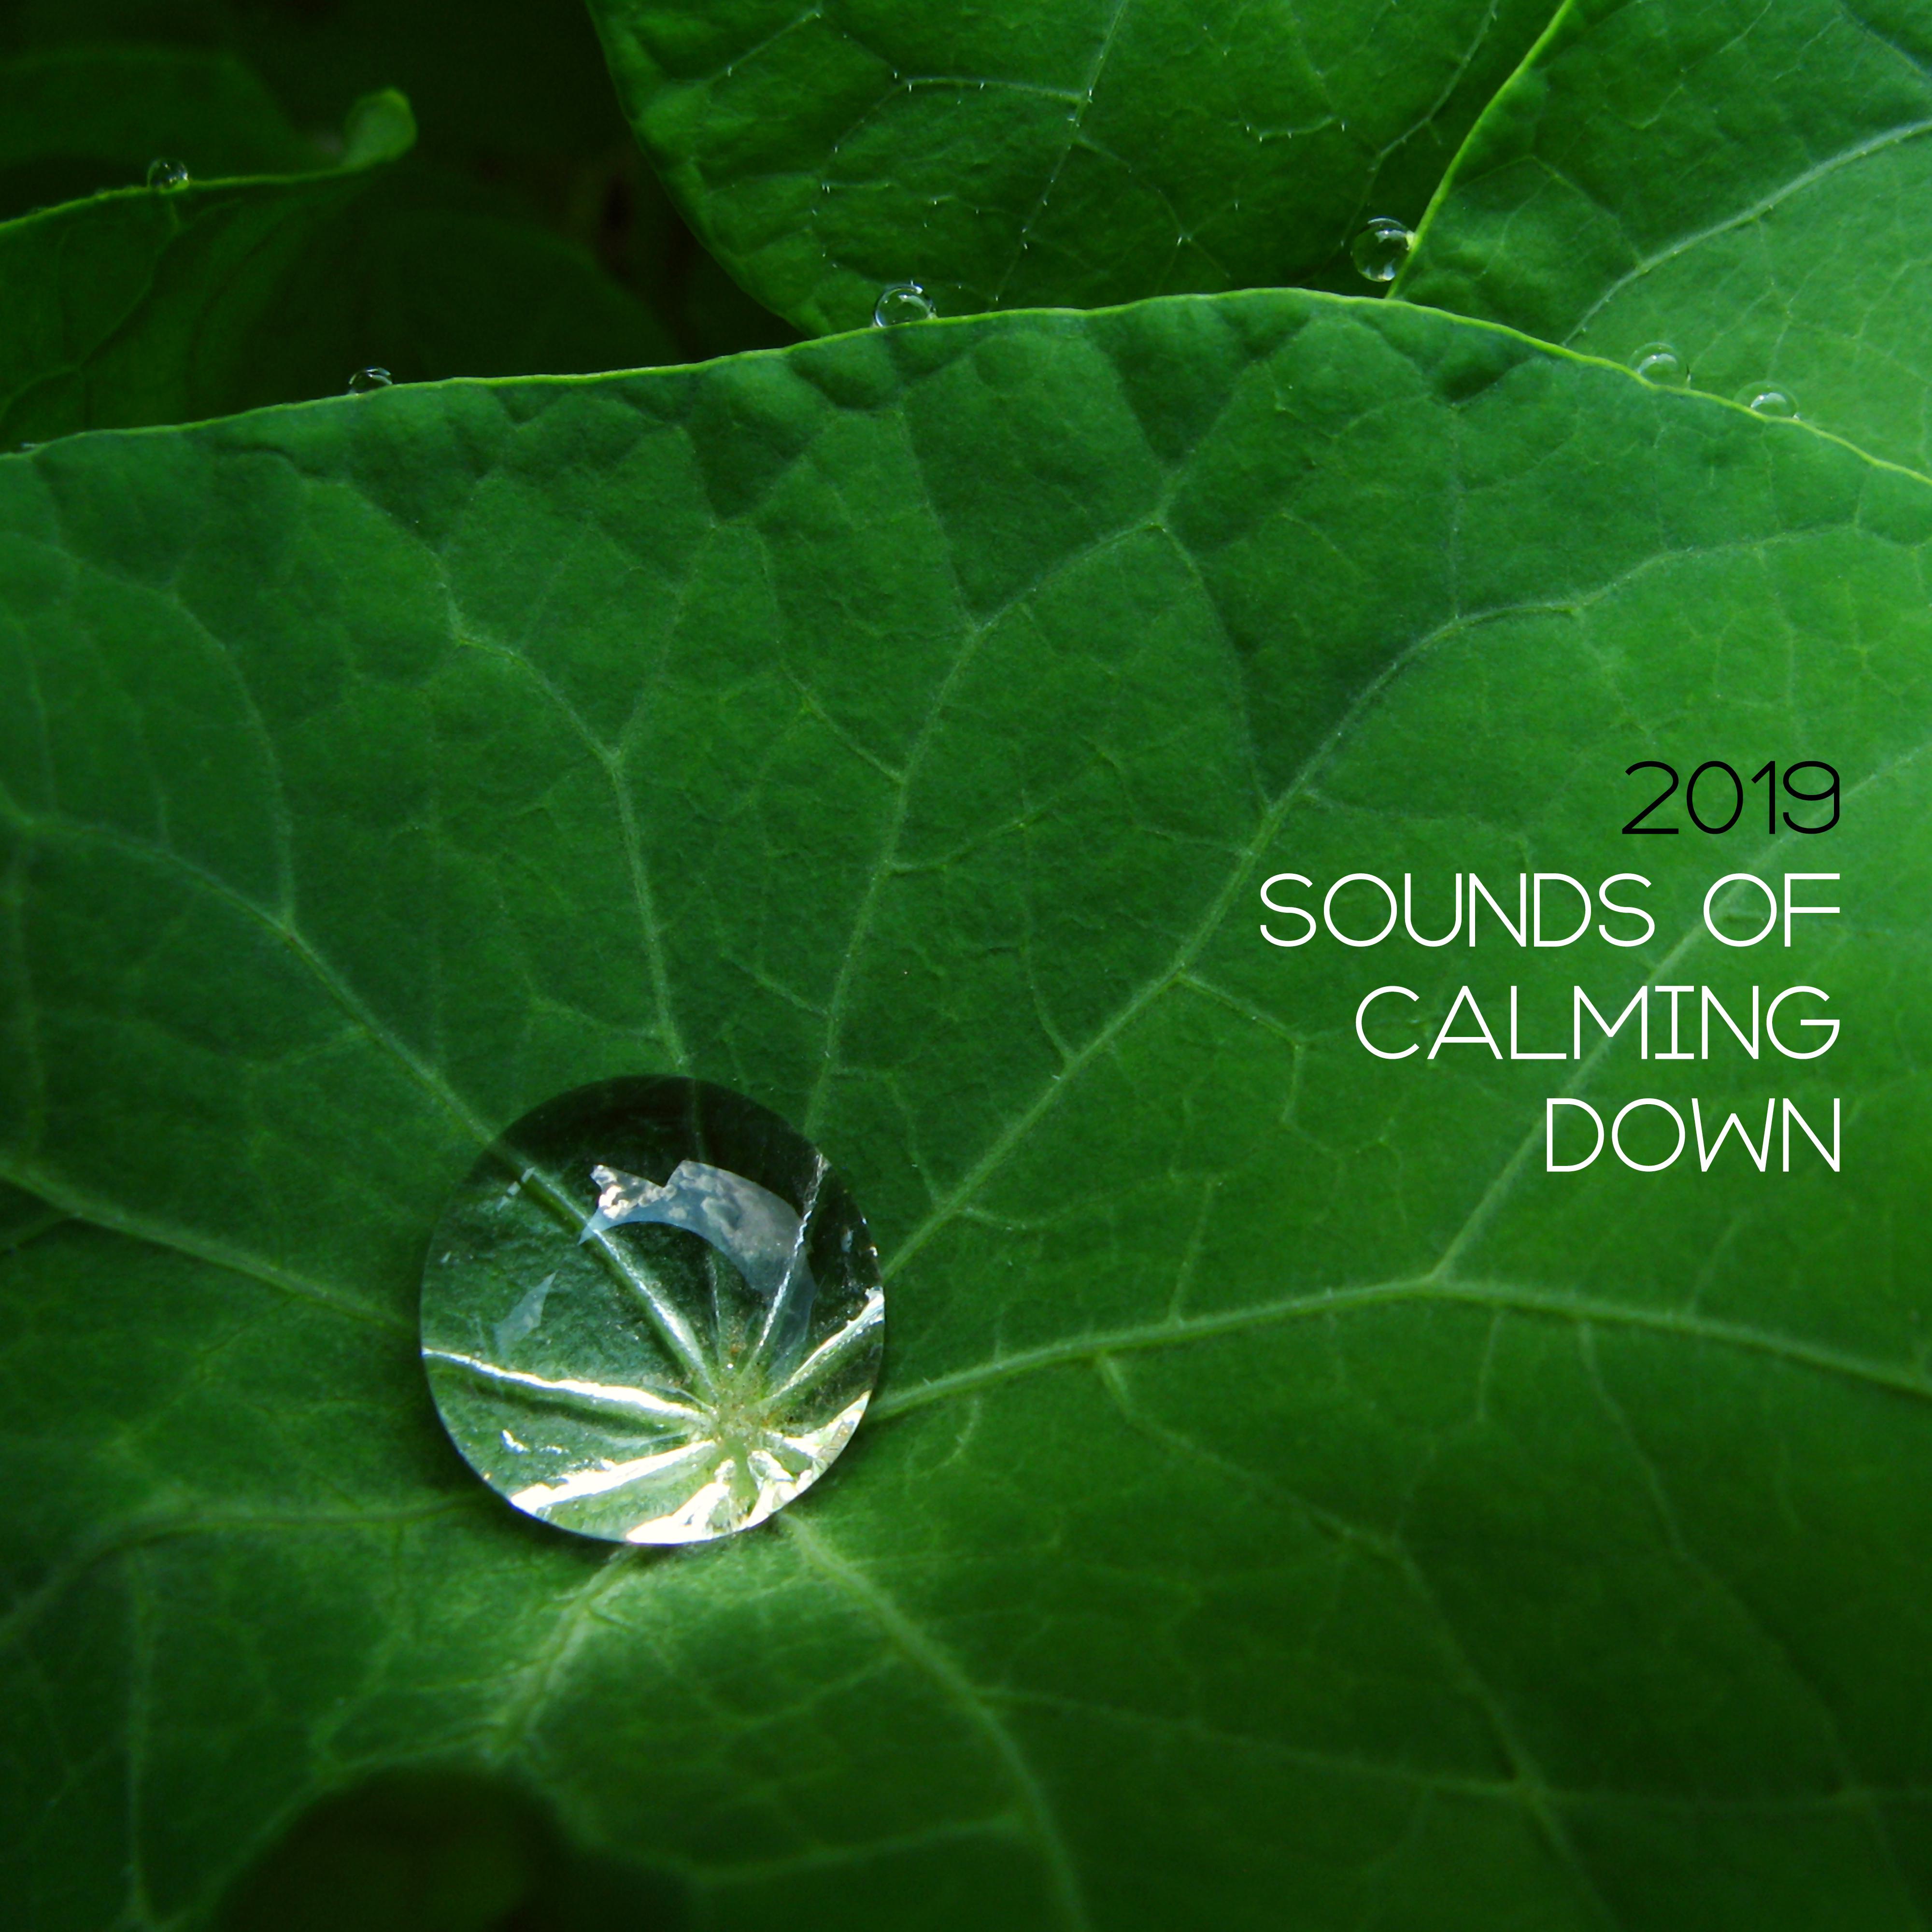 2019 Sounds of Calming Down – New Age Relaxing Music, Stress Relief, Nature Sounds of Water, Wind & Animals